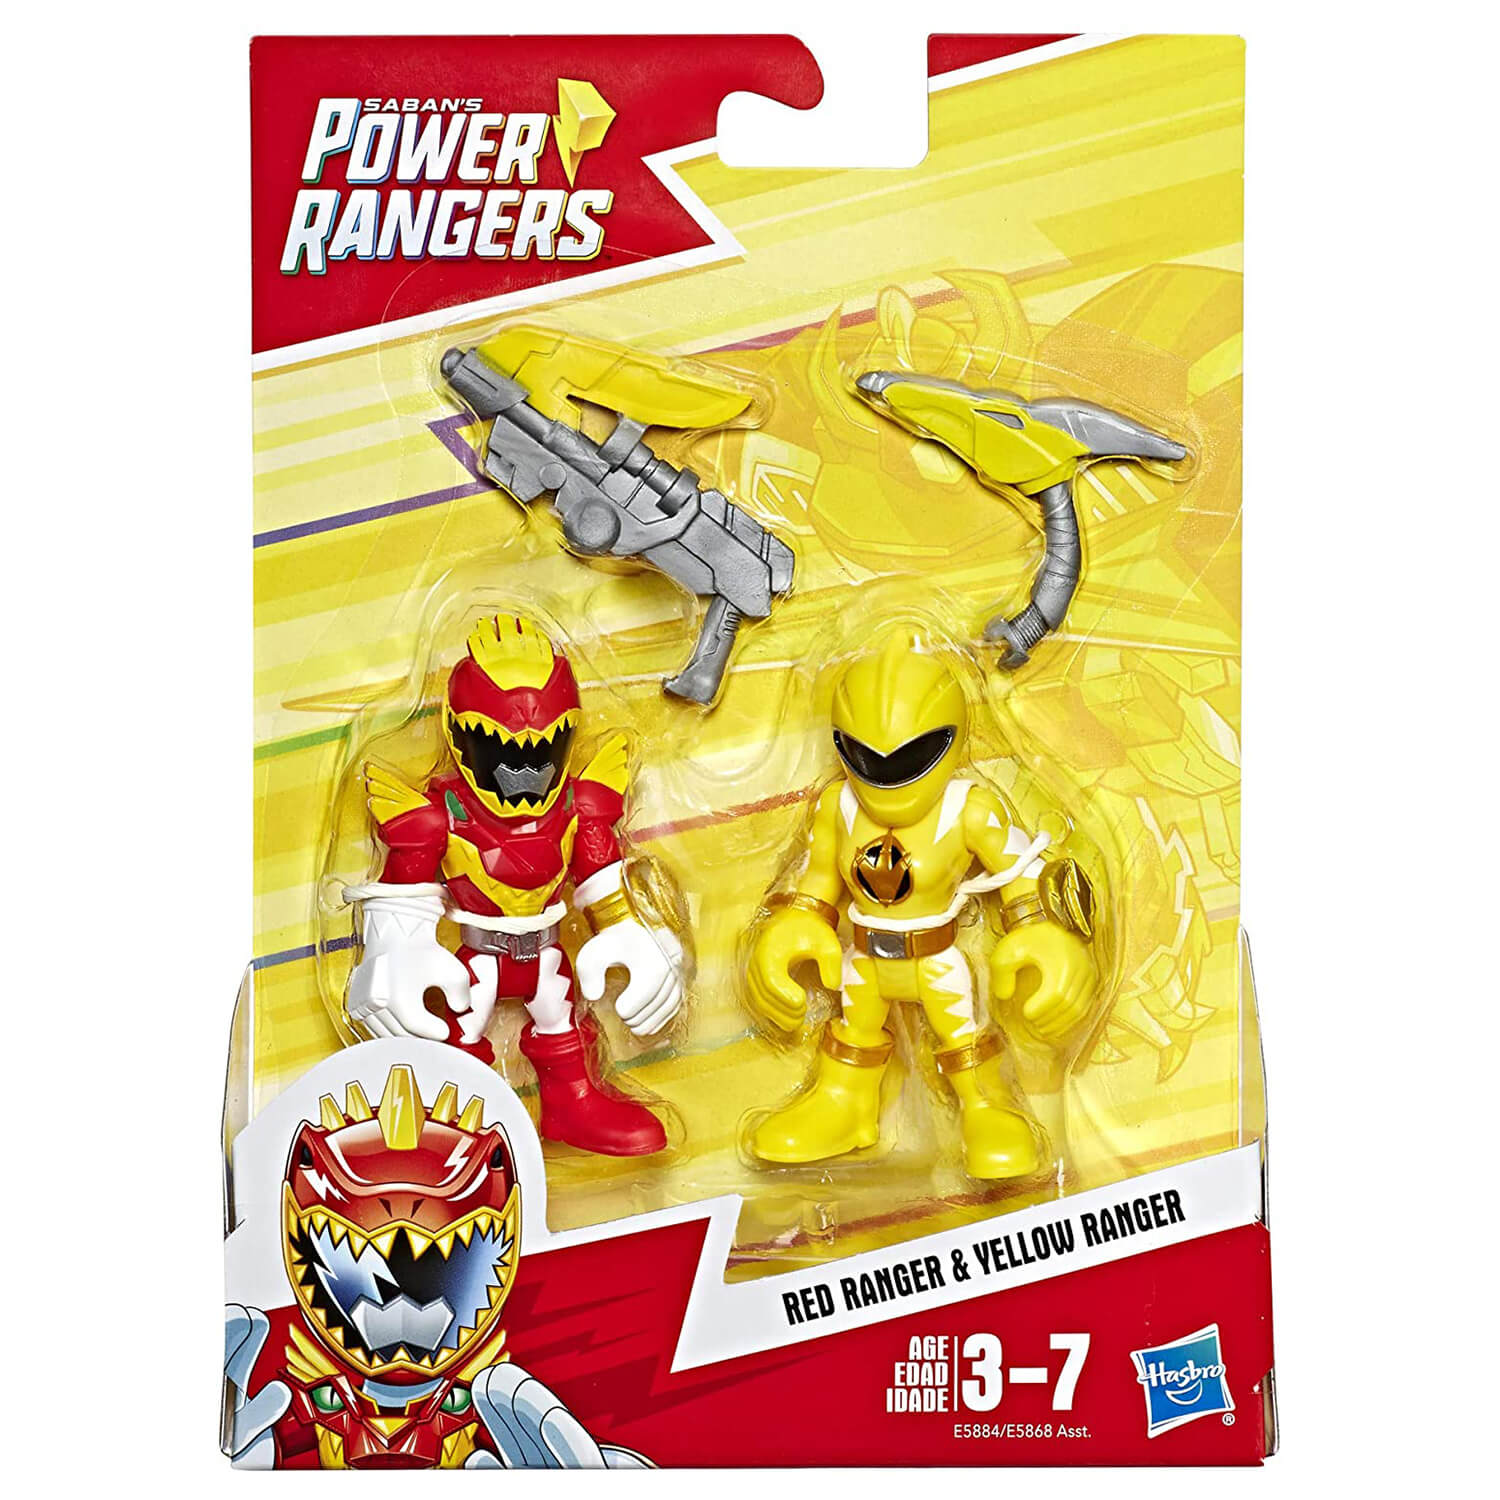 Front view of the Playskool Heroes Power Rangers Red Ranger & Yellow Ranger Figures package.